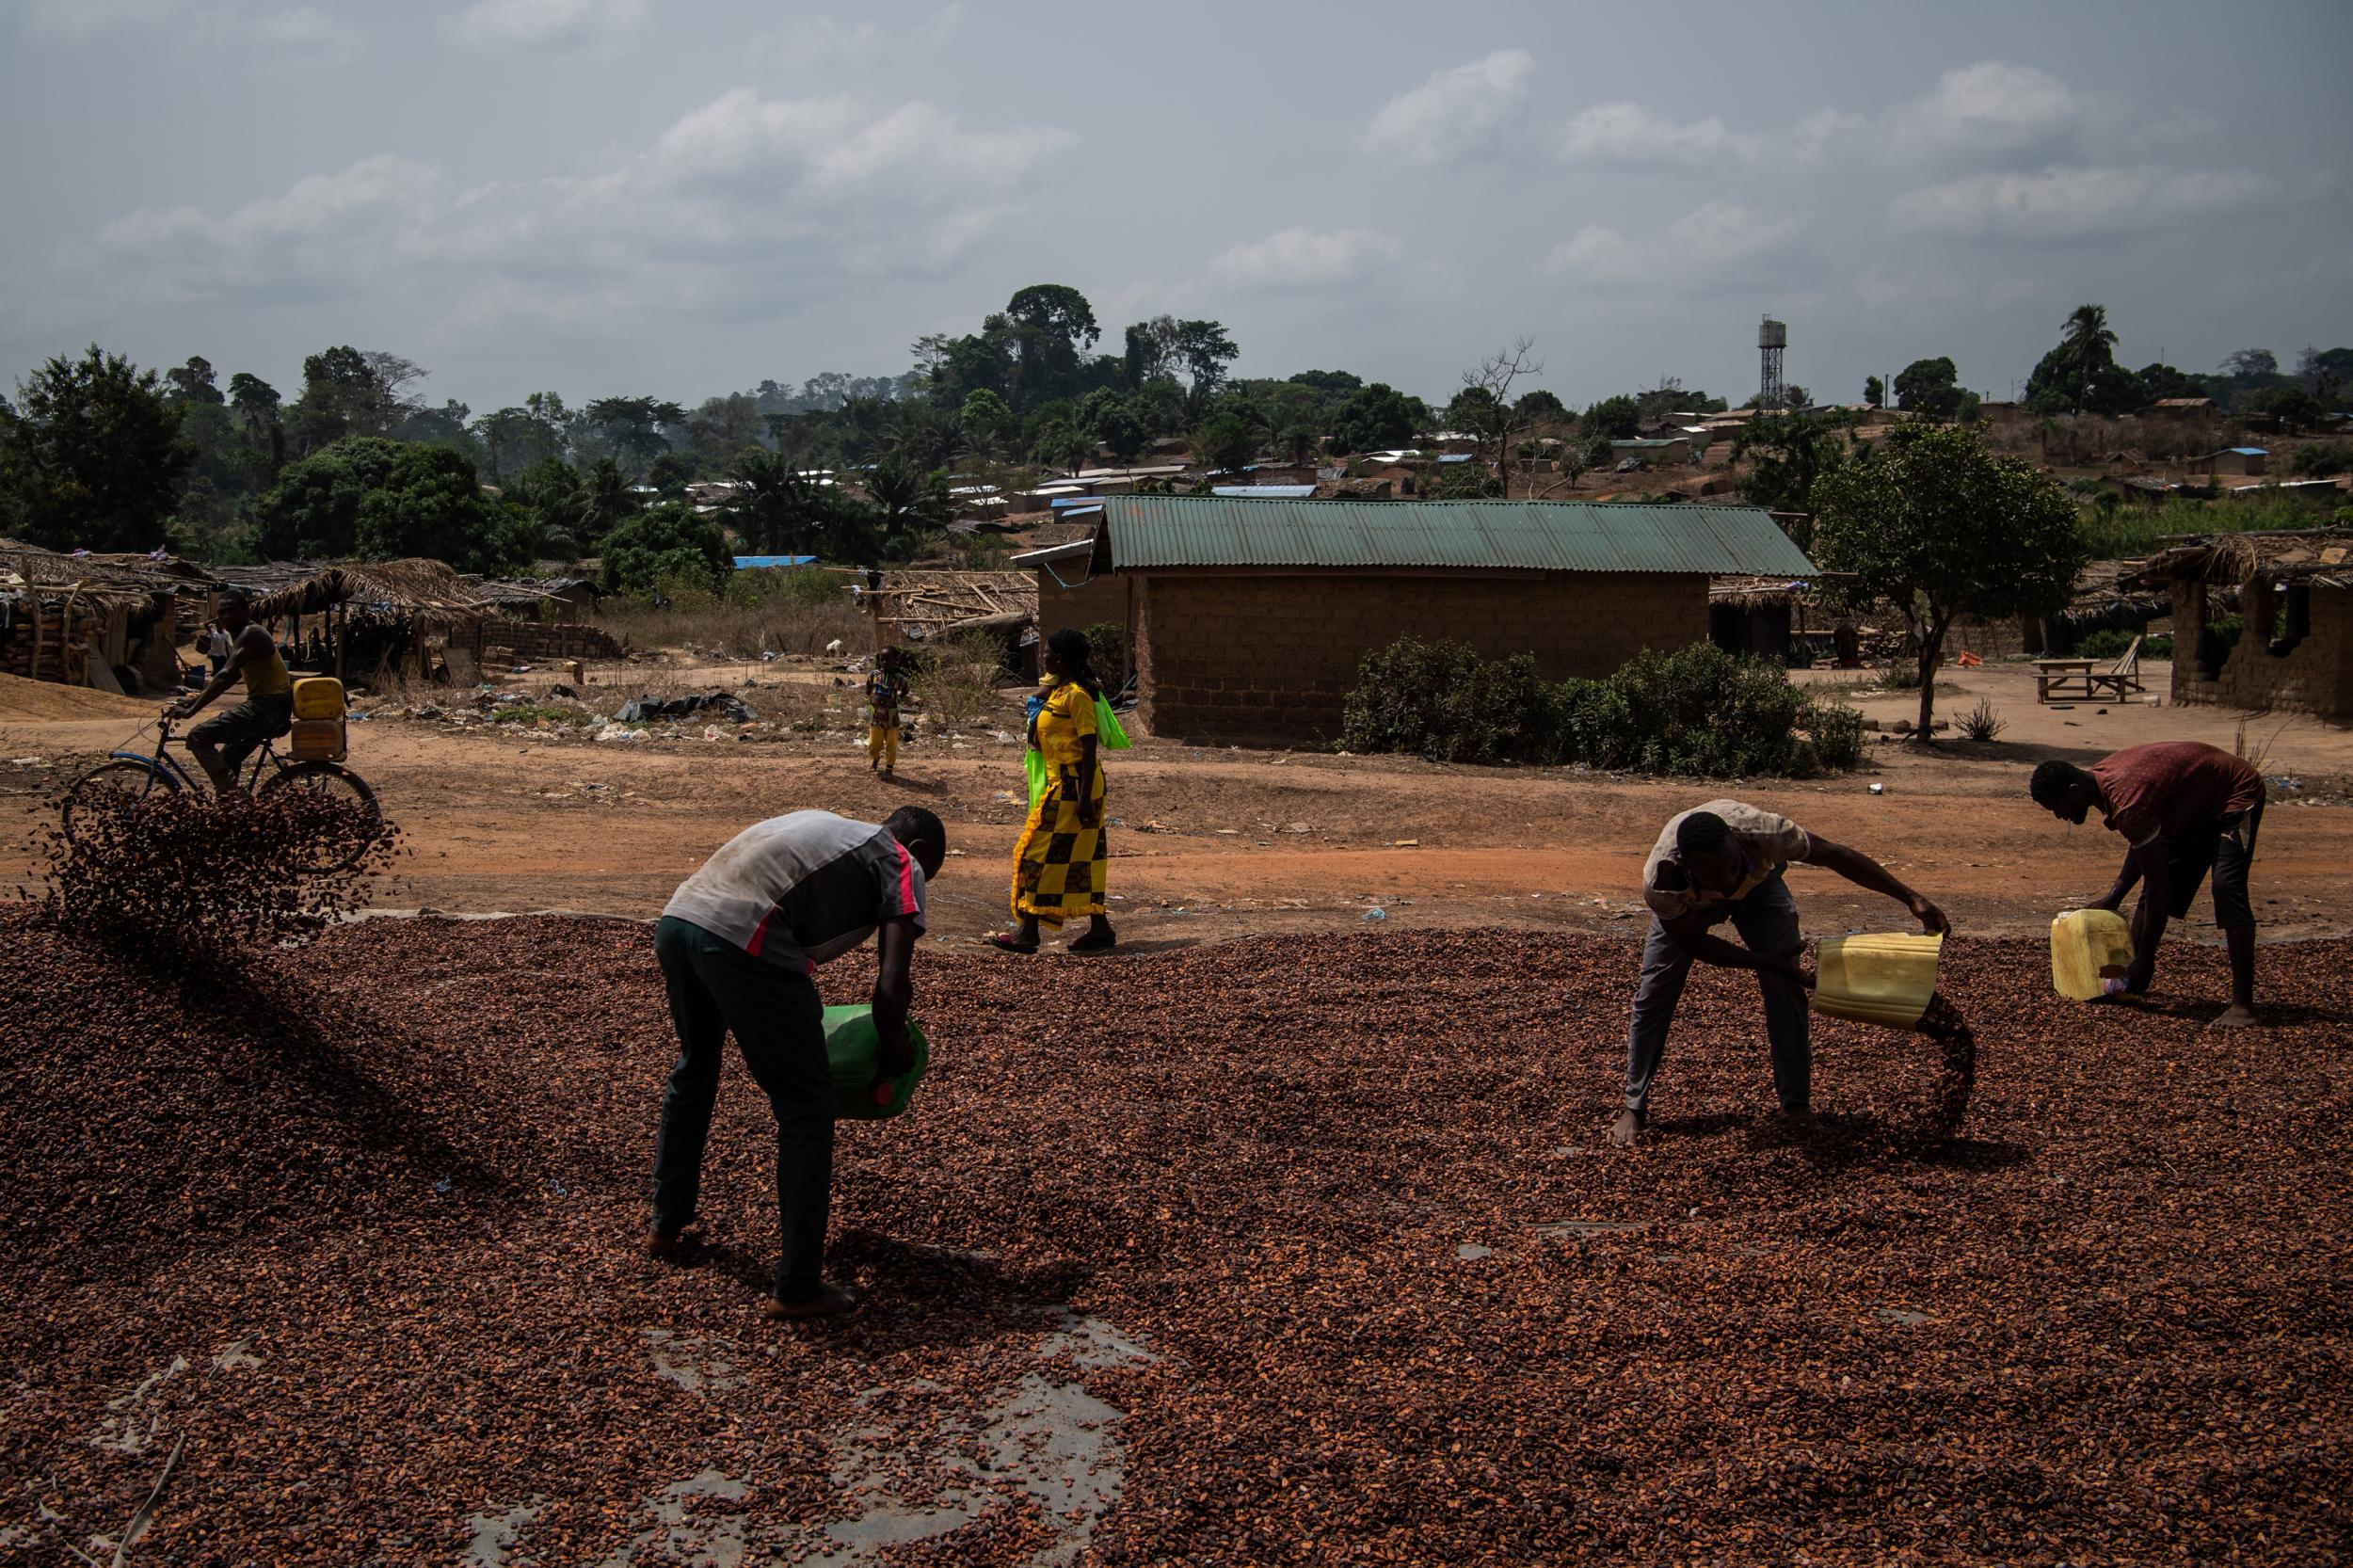 Workers gather dried cocoa beans outside a cooperative facility in the village of Gloplou